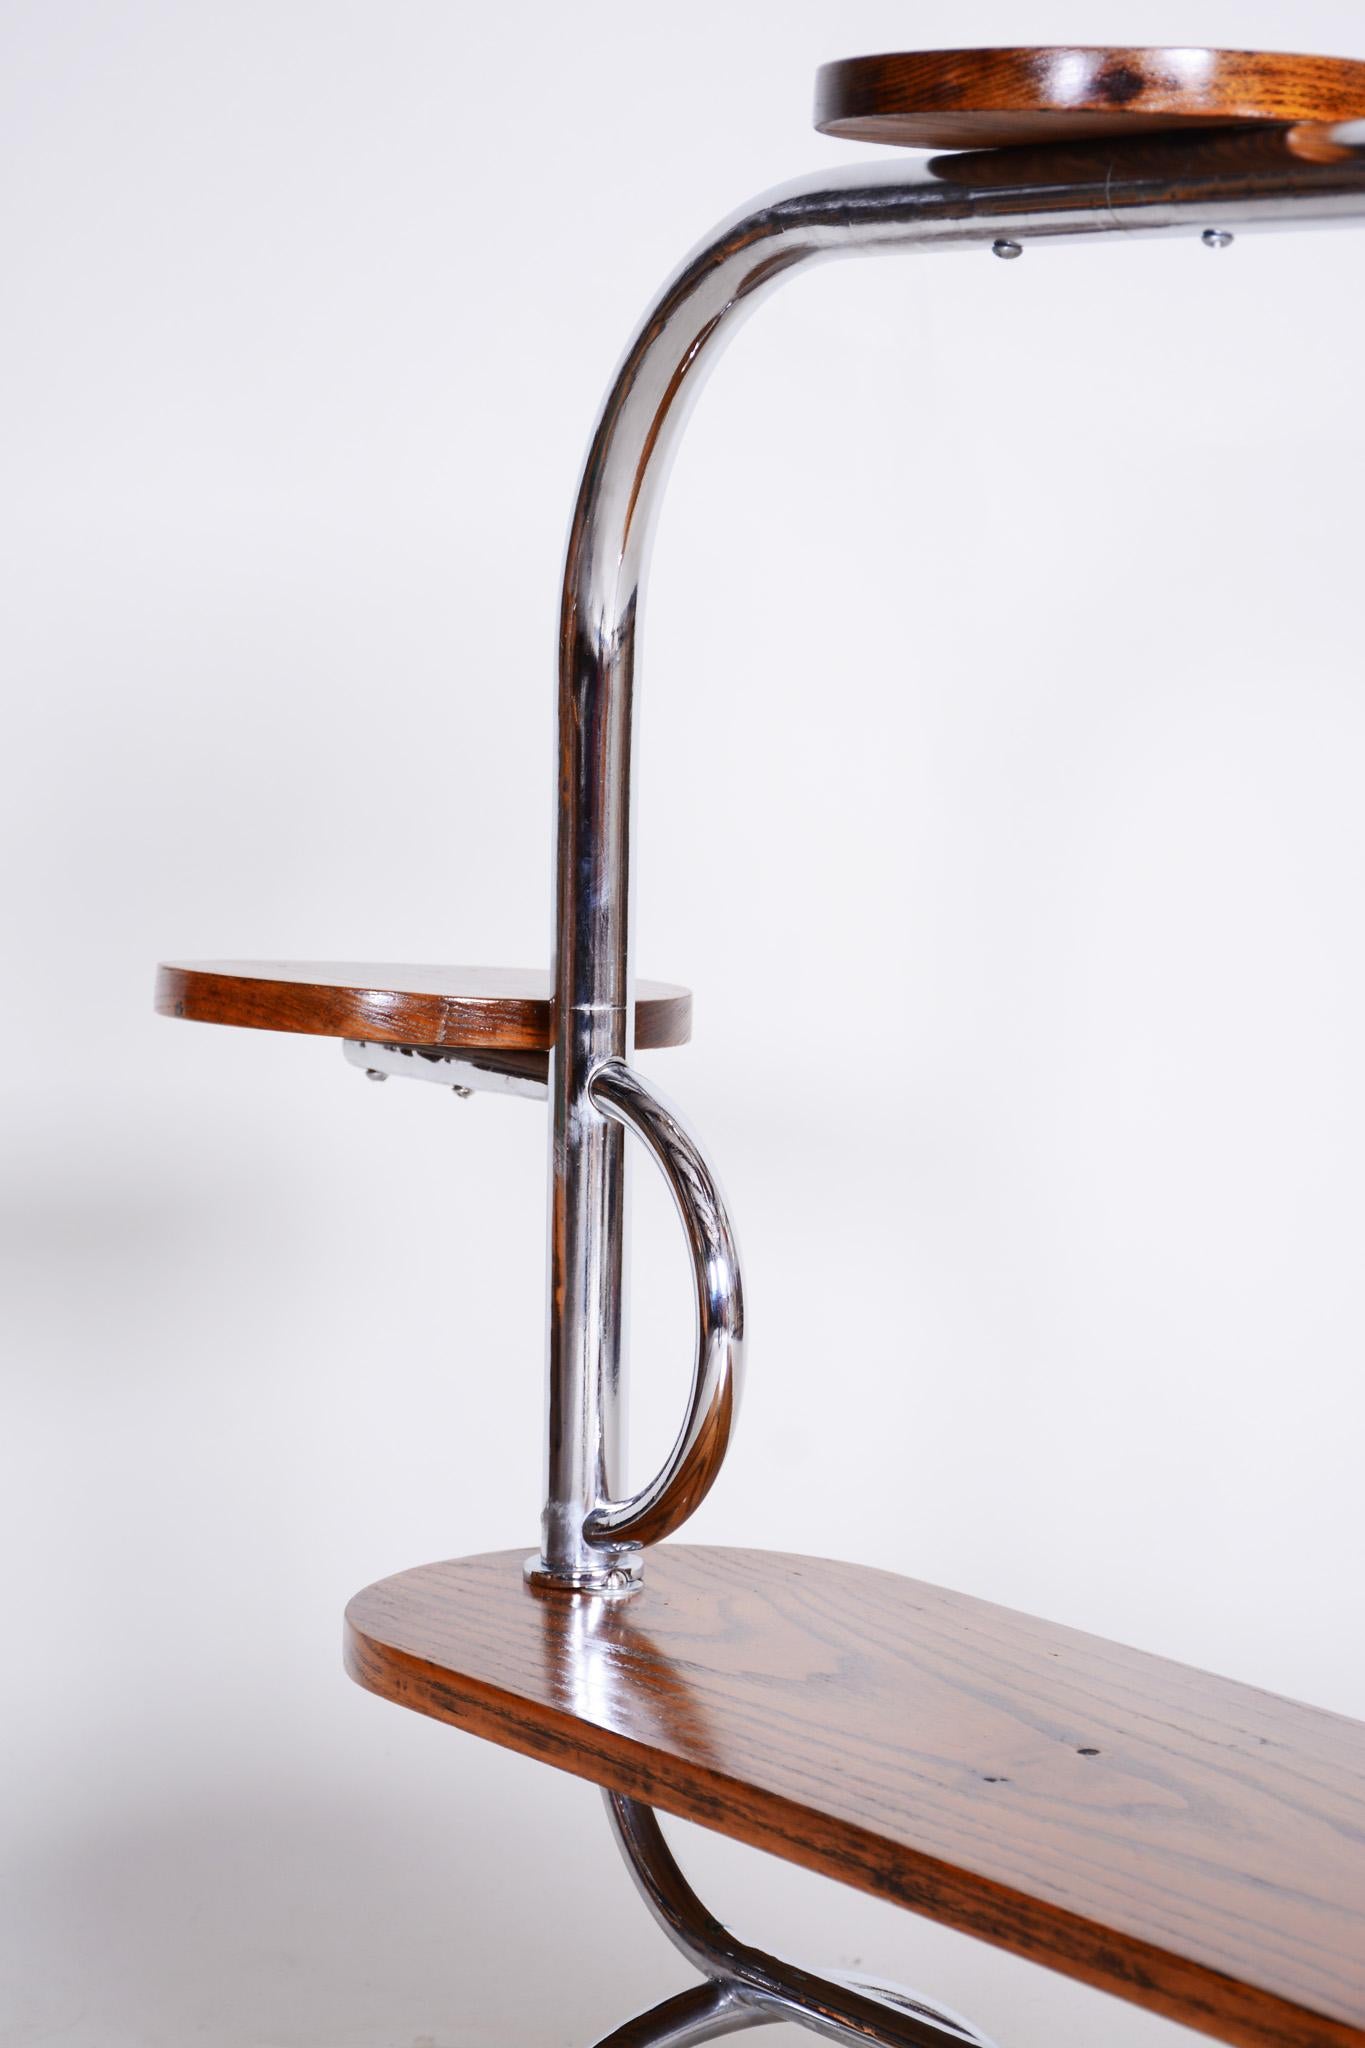 Czech Bauhaus Chrome Flower Stand Made Out of Oak, Lacquered, 1930s For Sale 2